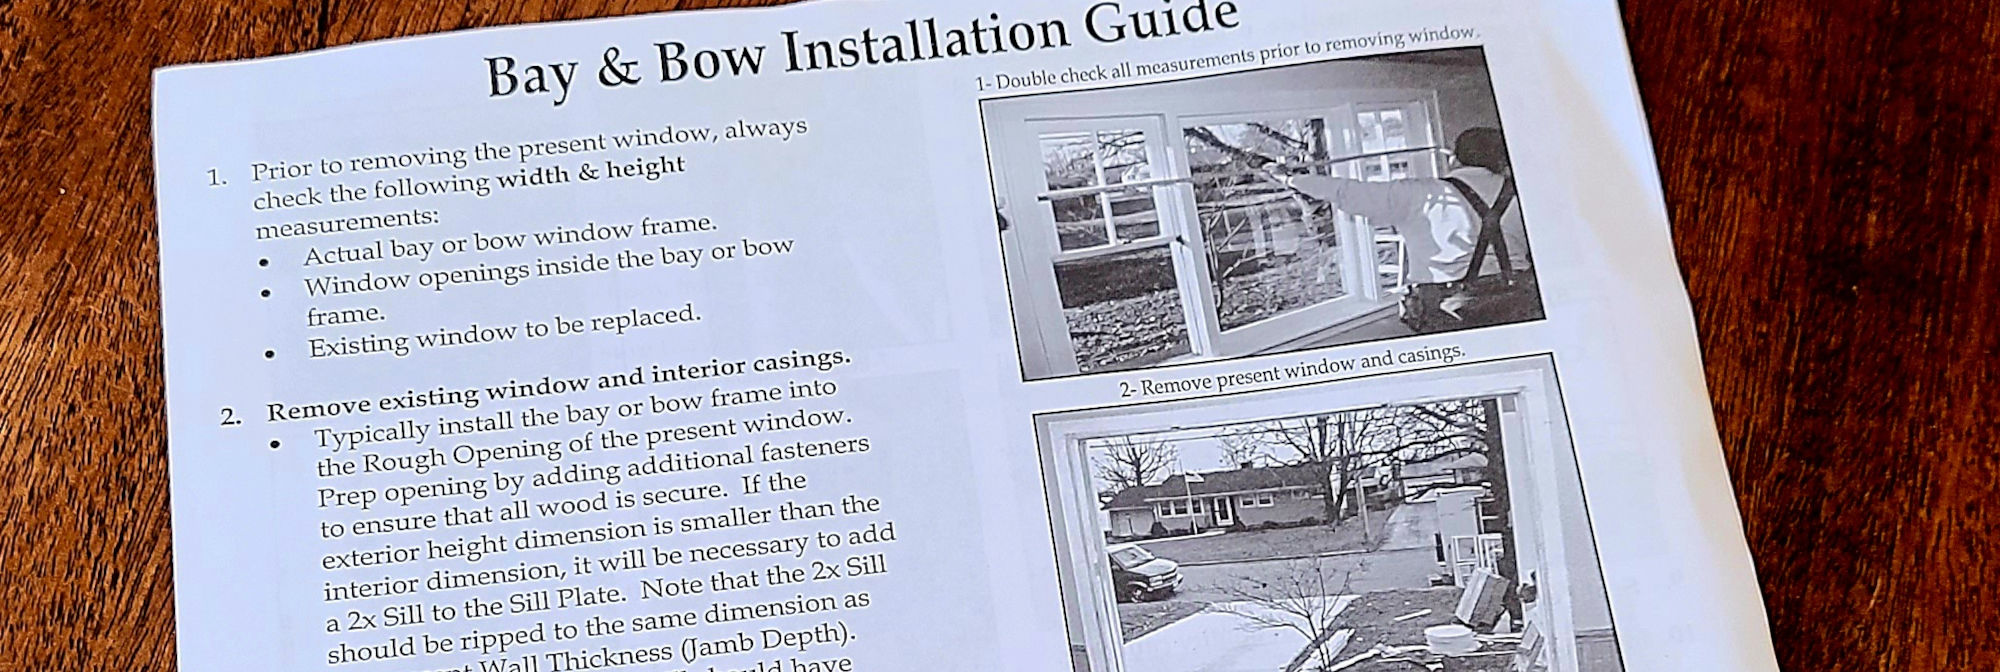 Image of a Bay & Bow Installation Guide